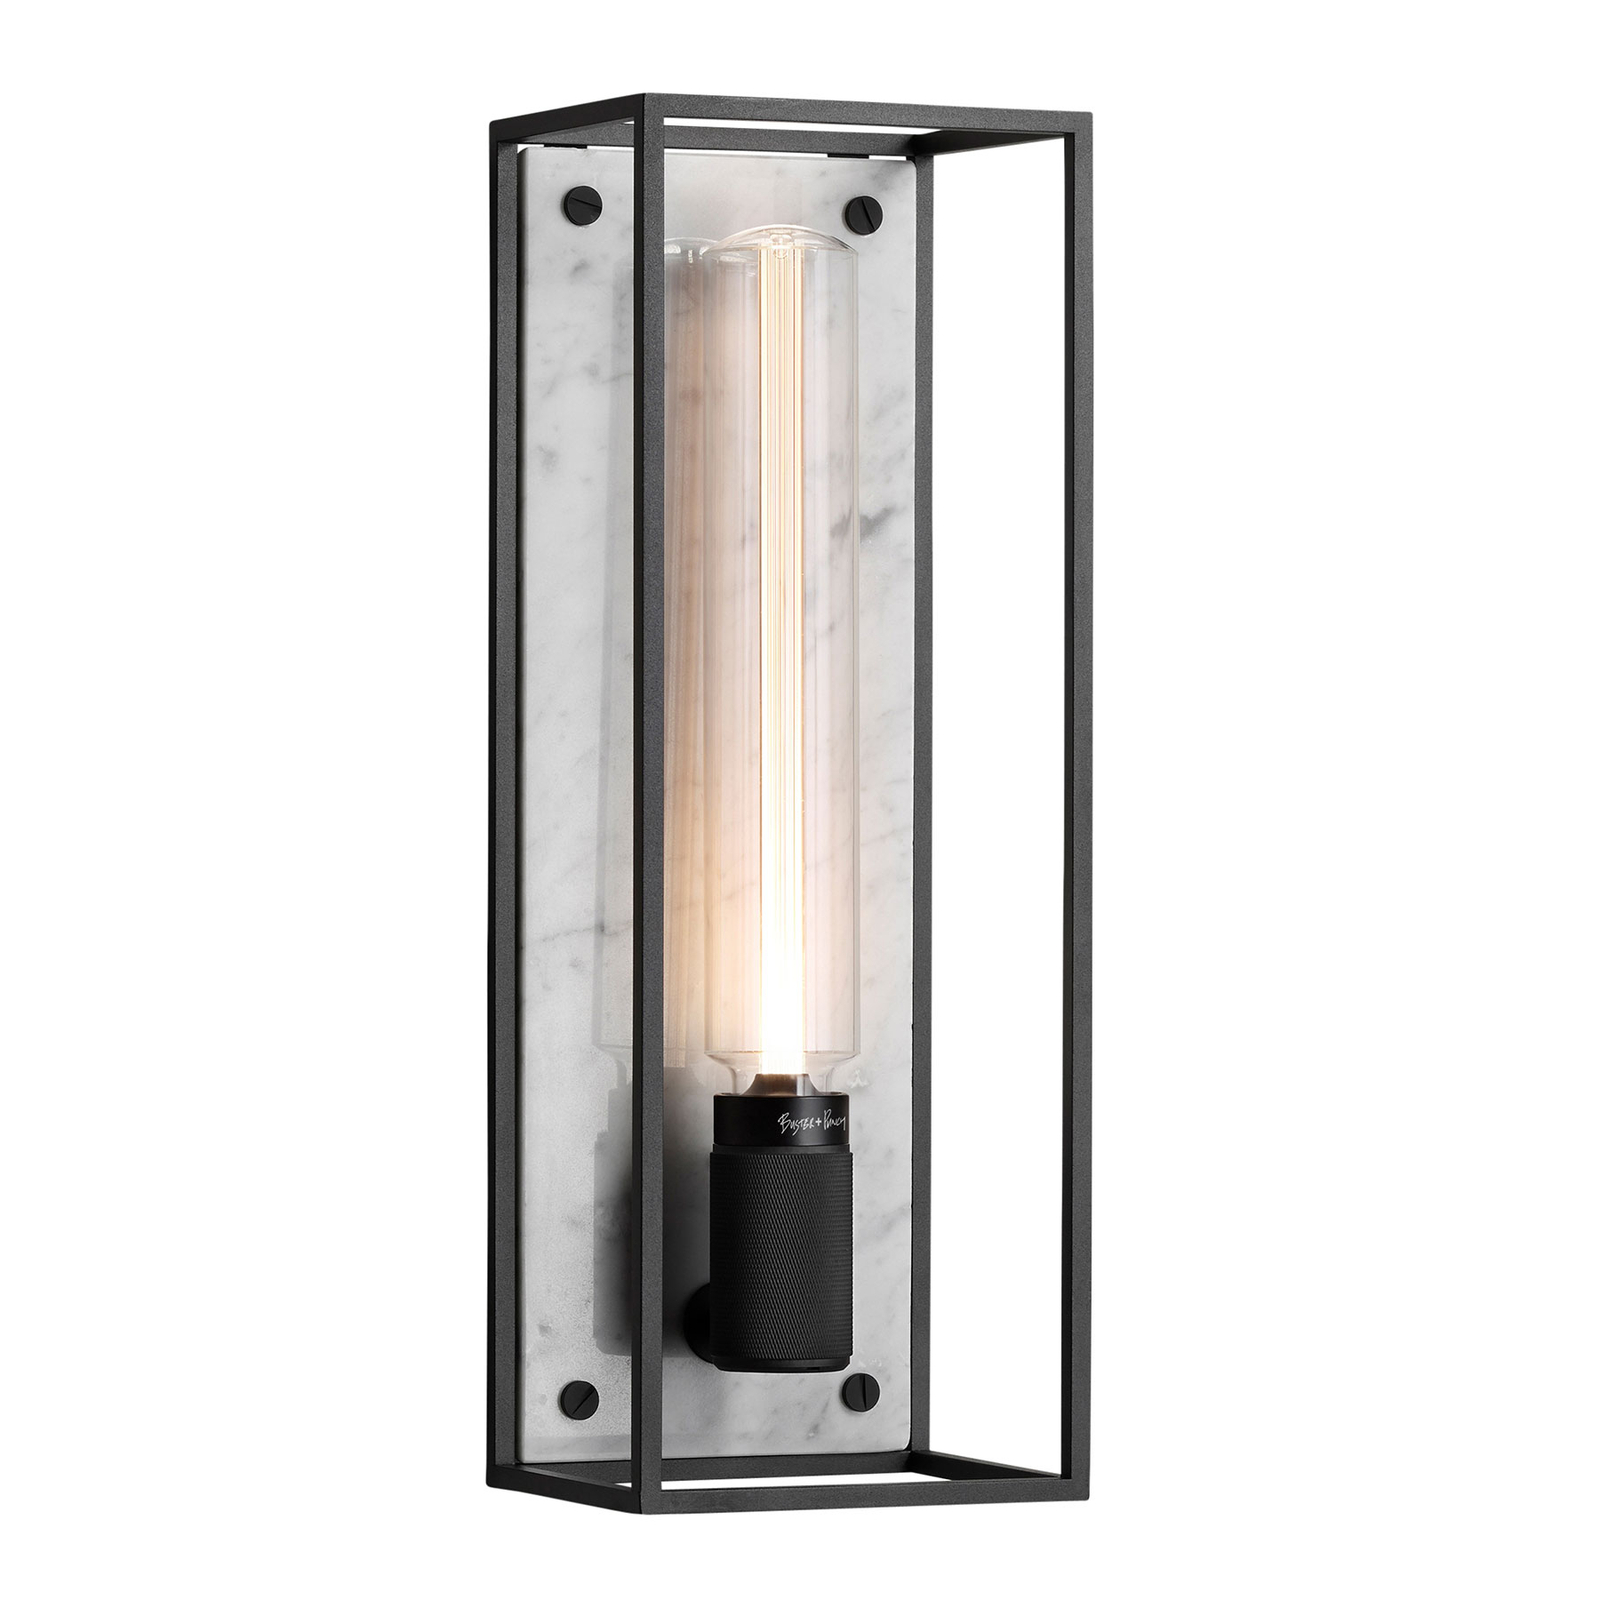 Buster + Punch Caged Wall large LED marmer wit